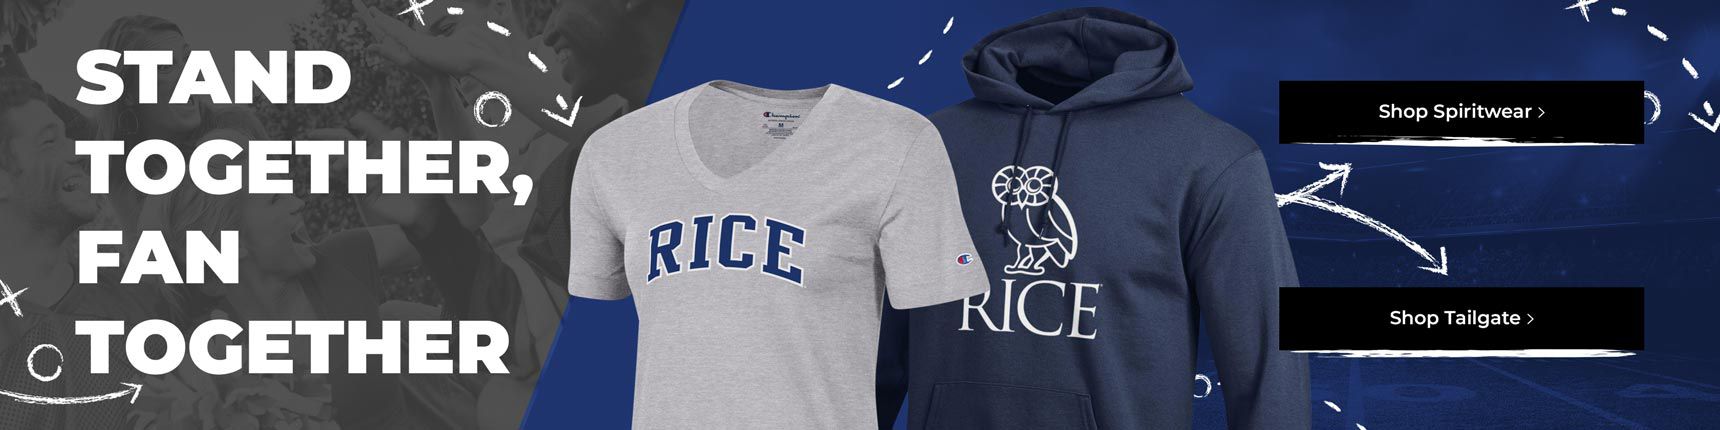 Rice Campus Store Apparel Merchandise Gifts - roblox id codes kid gets heart id clothing